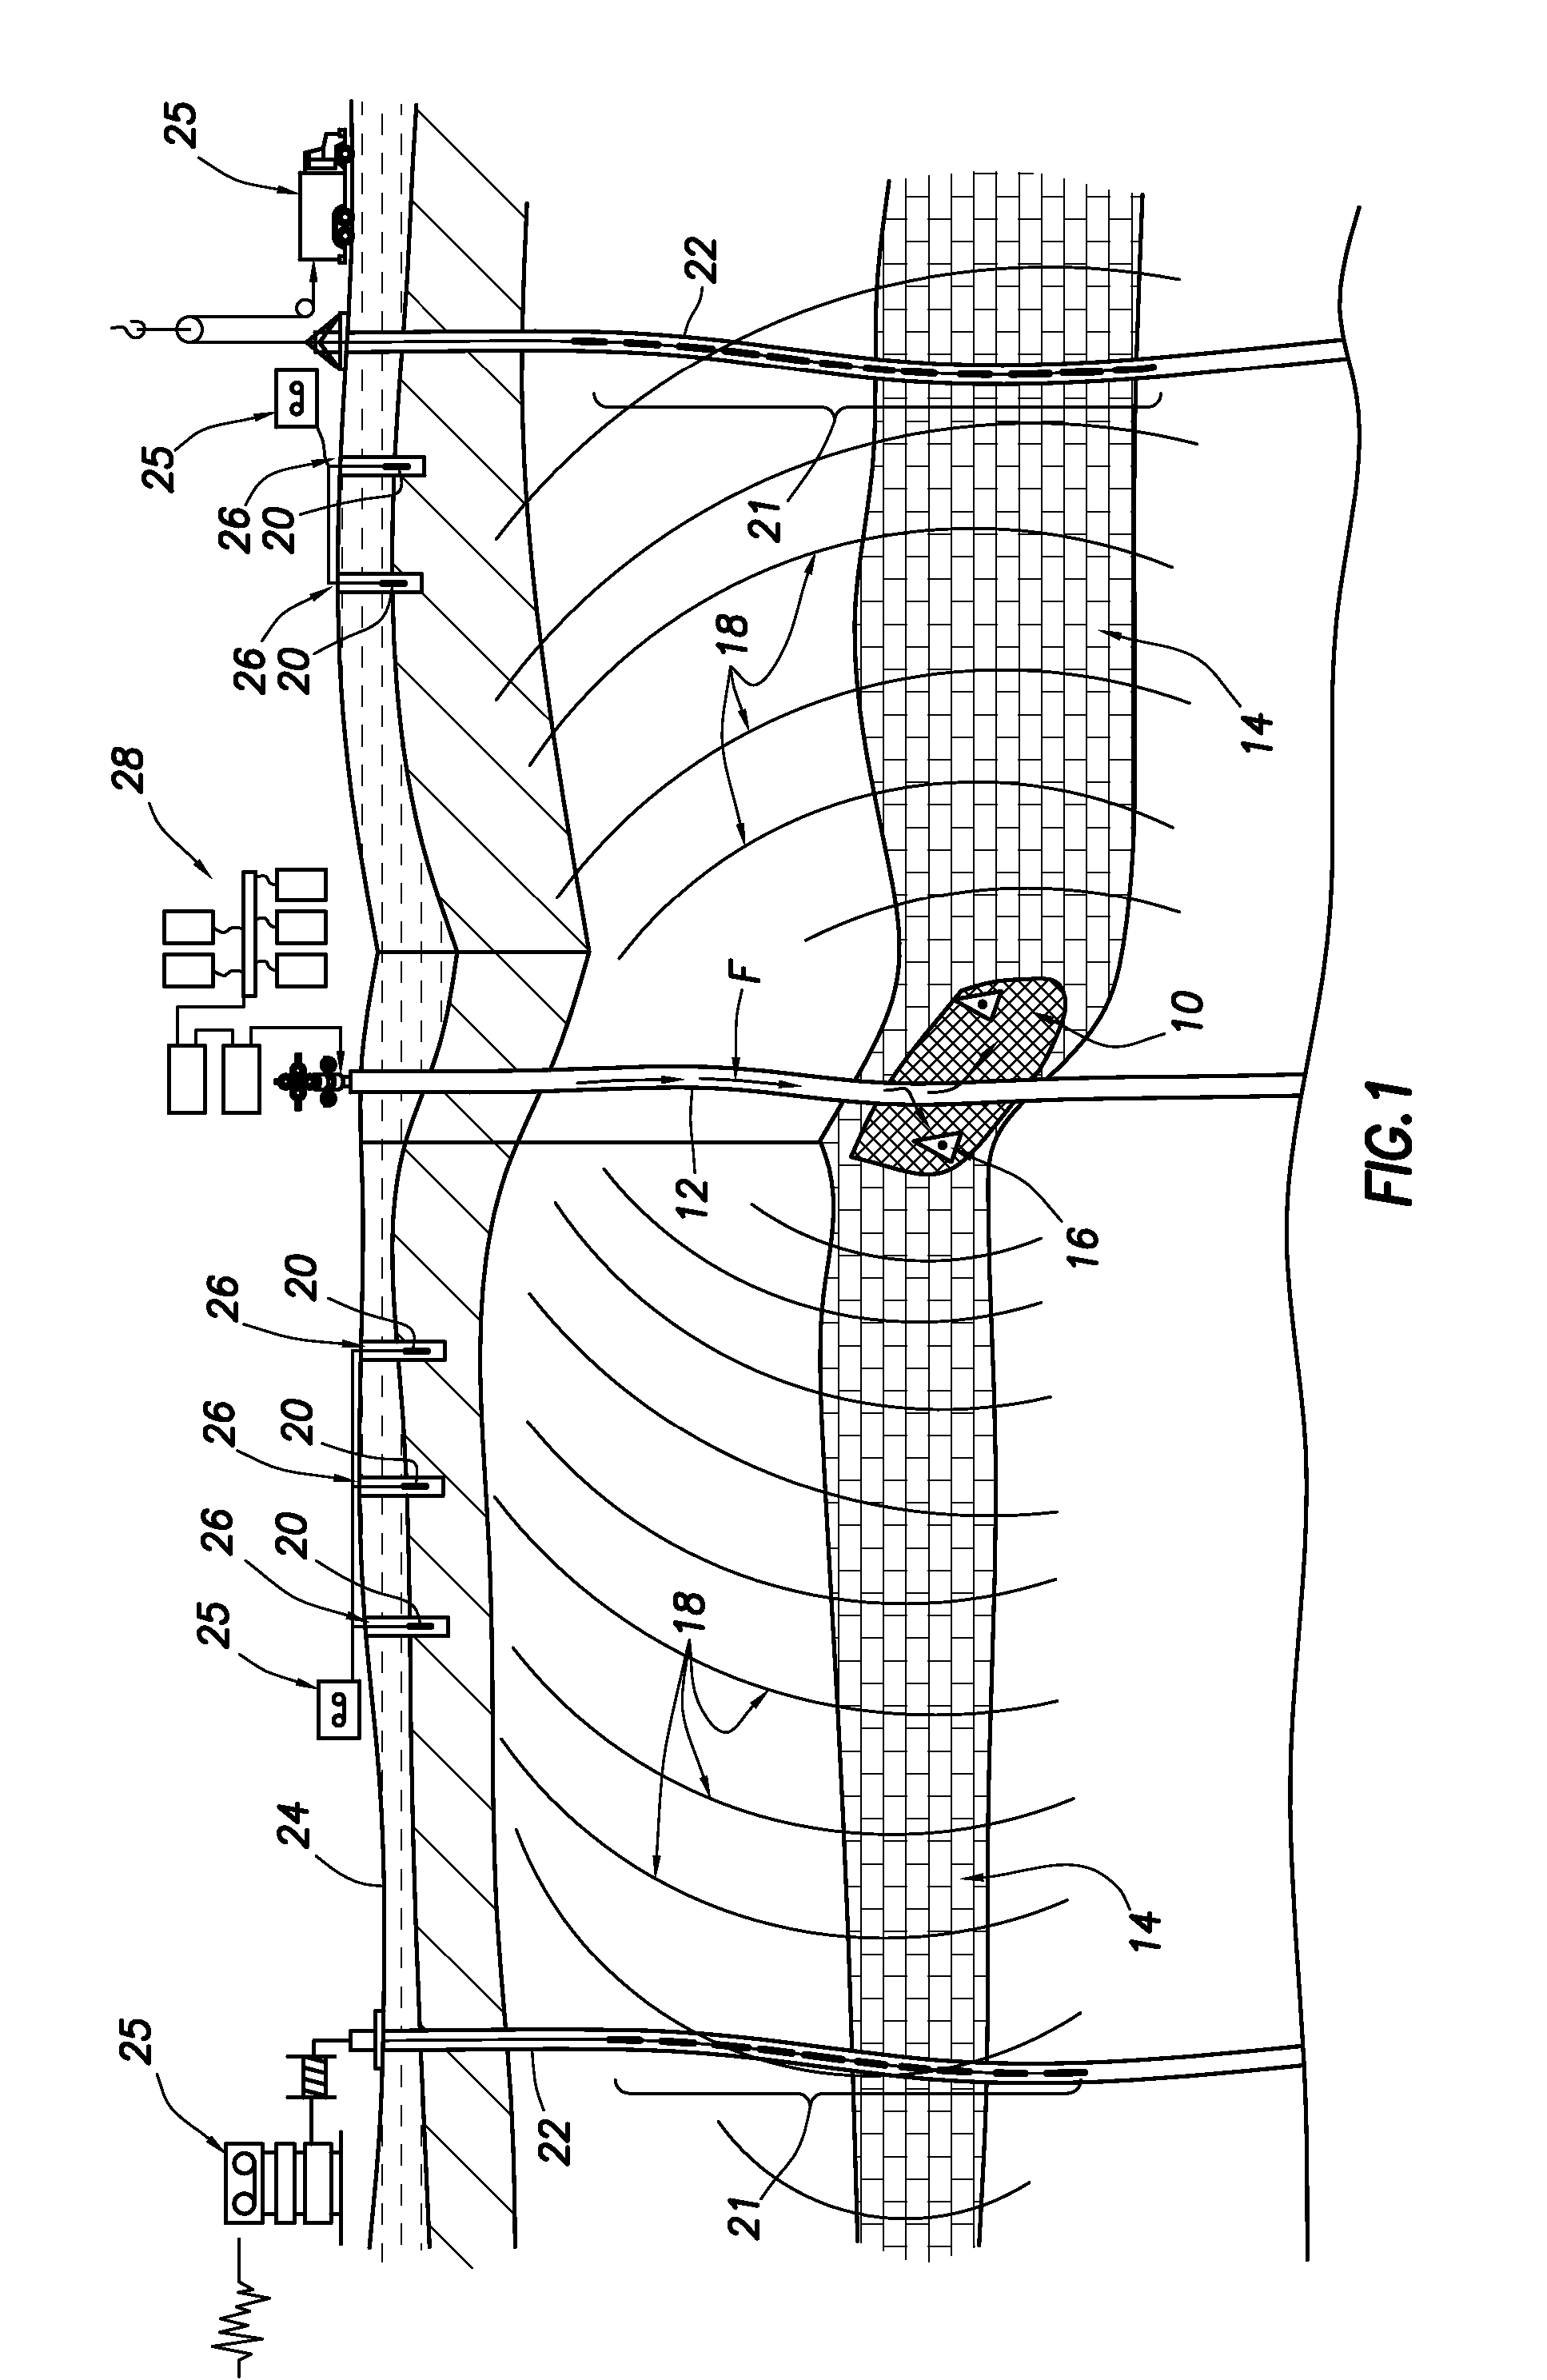 Method and apparatus for generating seismic pulses to map subterranean fractures